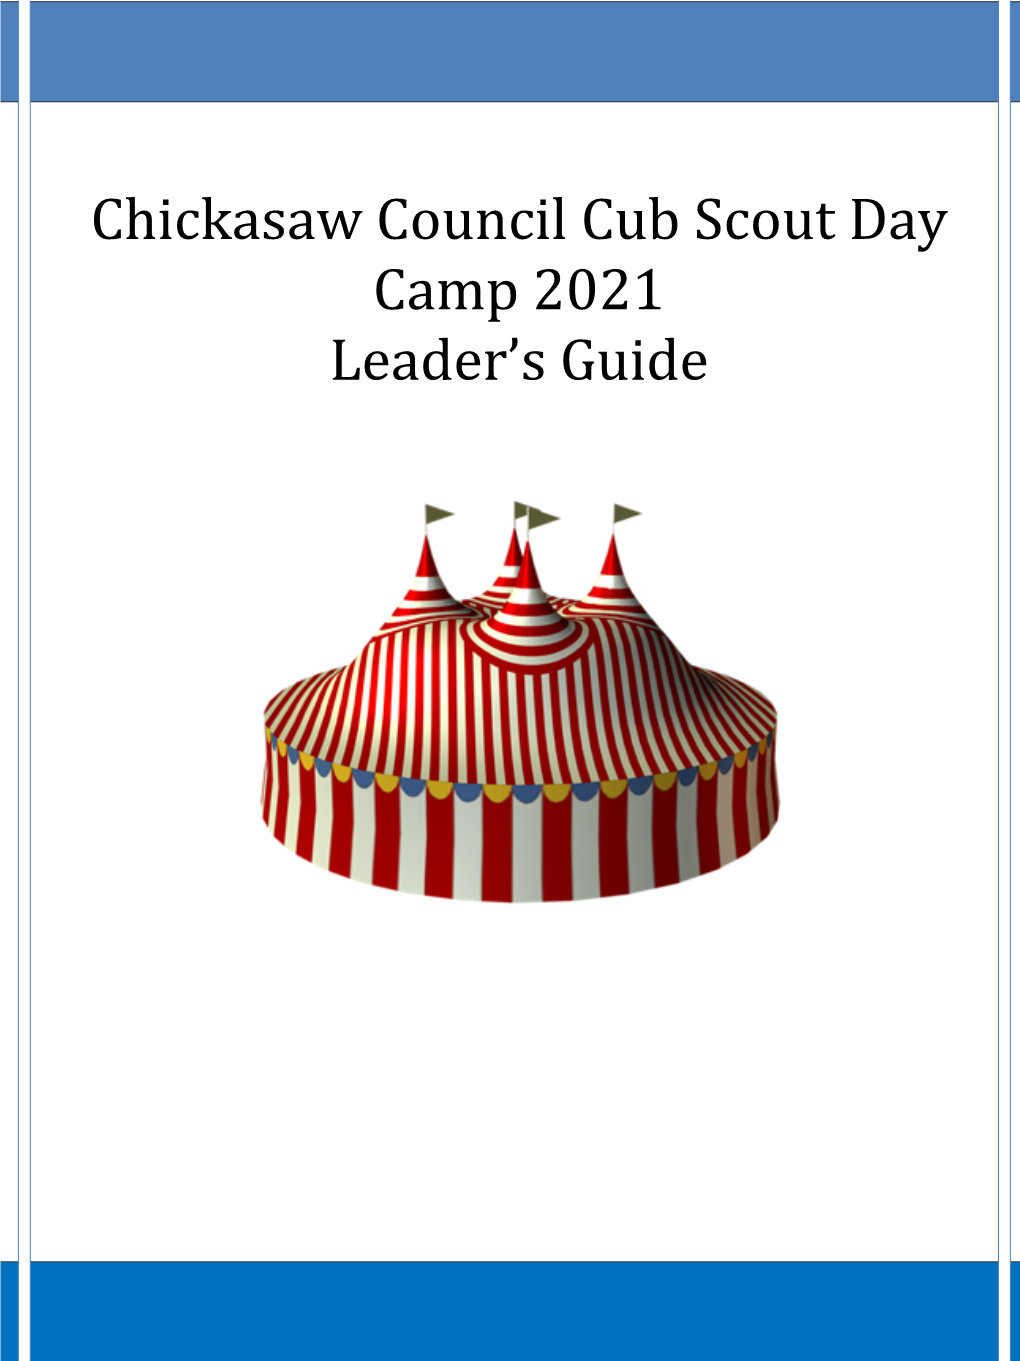 Chickasaw Council Cub Scout Day Camp 2021 Leader's Guide